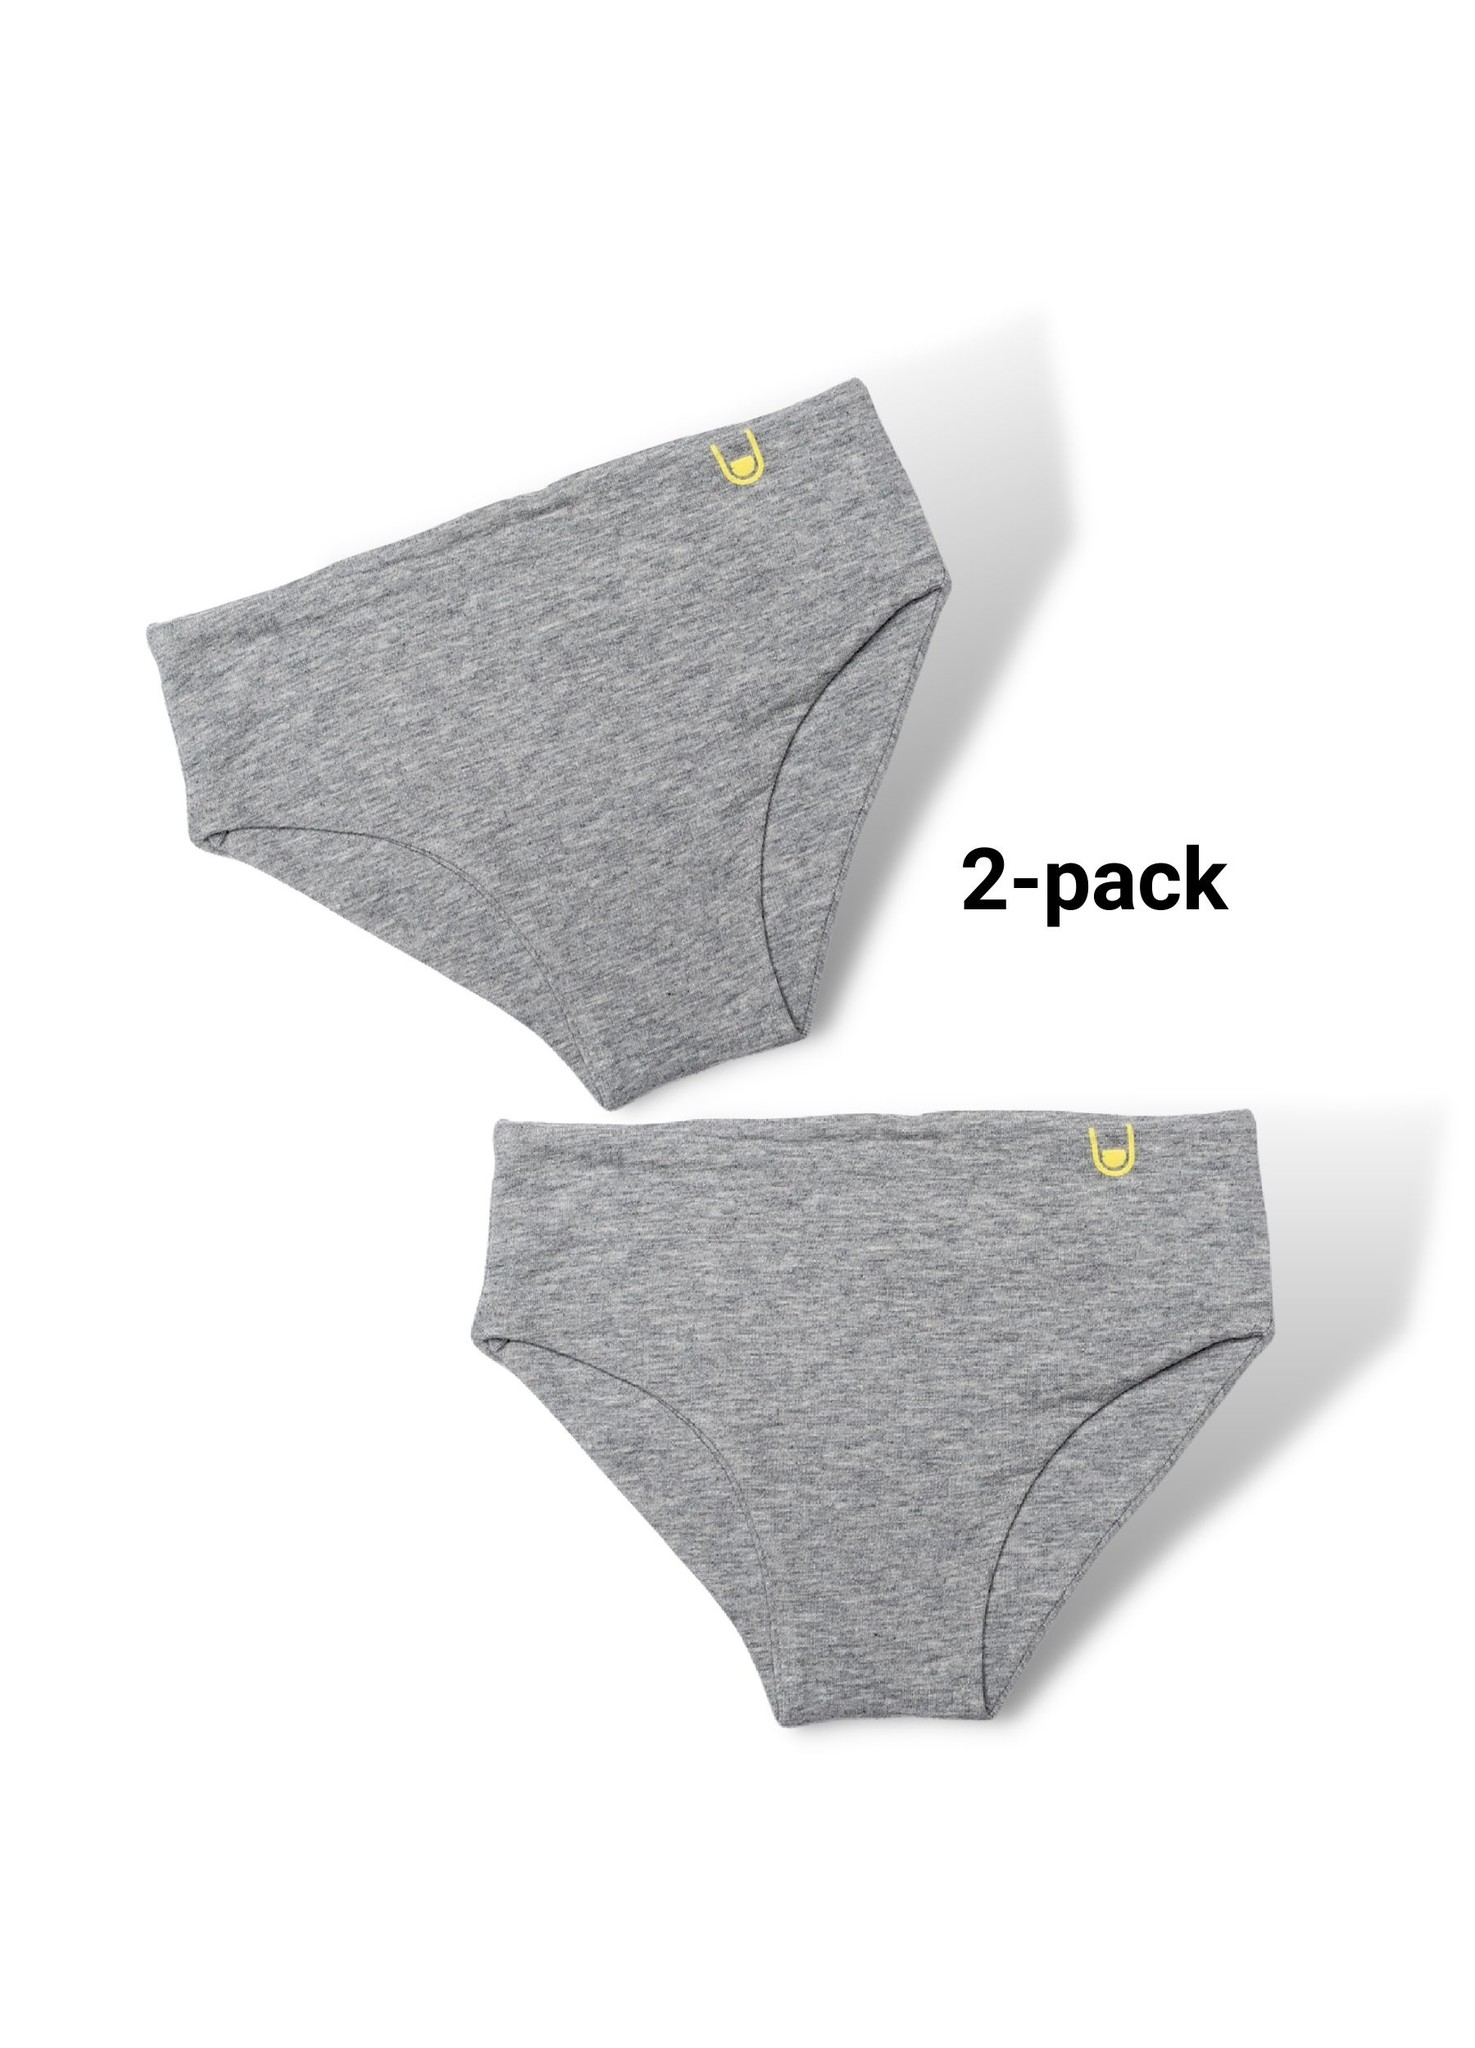 Soft girls briefs. Seamless, no itchy labels. From organic Cotton. - SAM,  Sensory & More